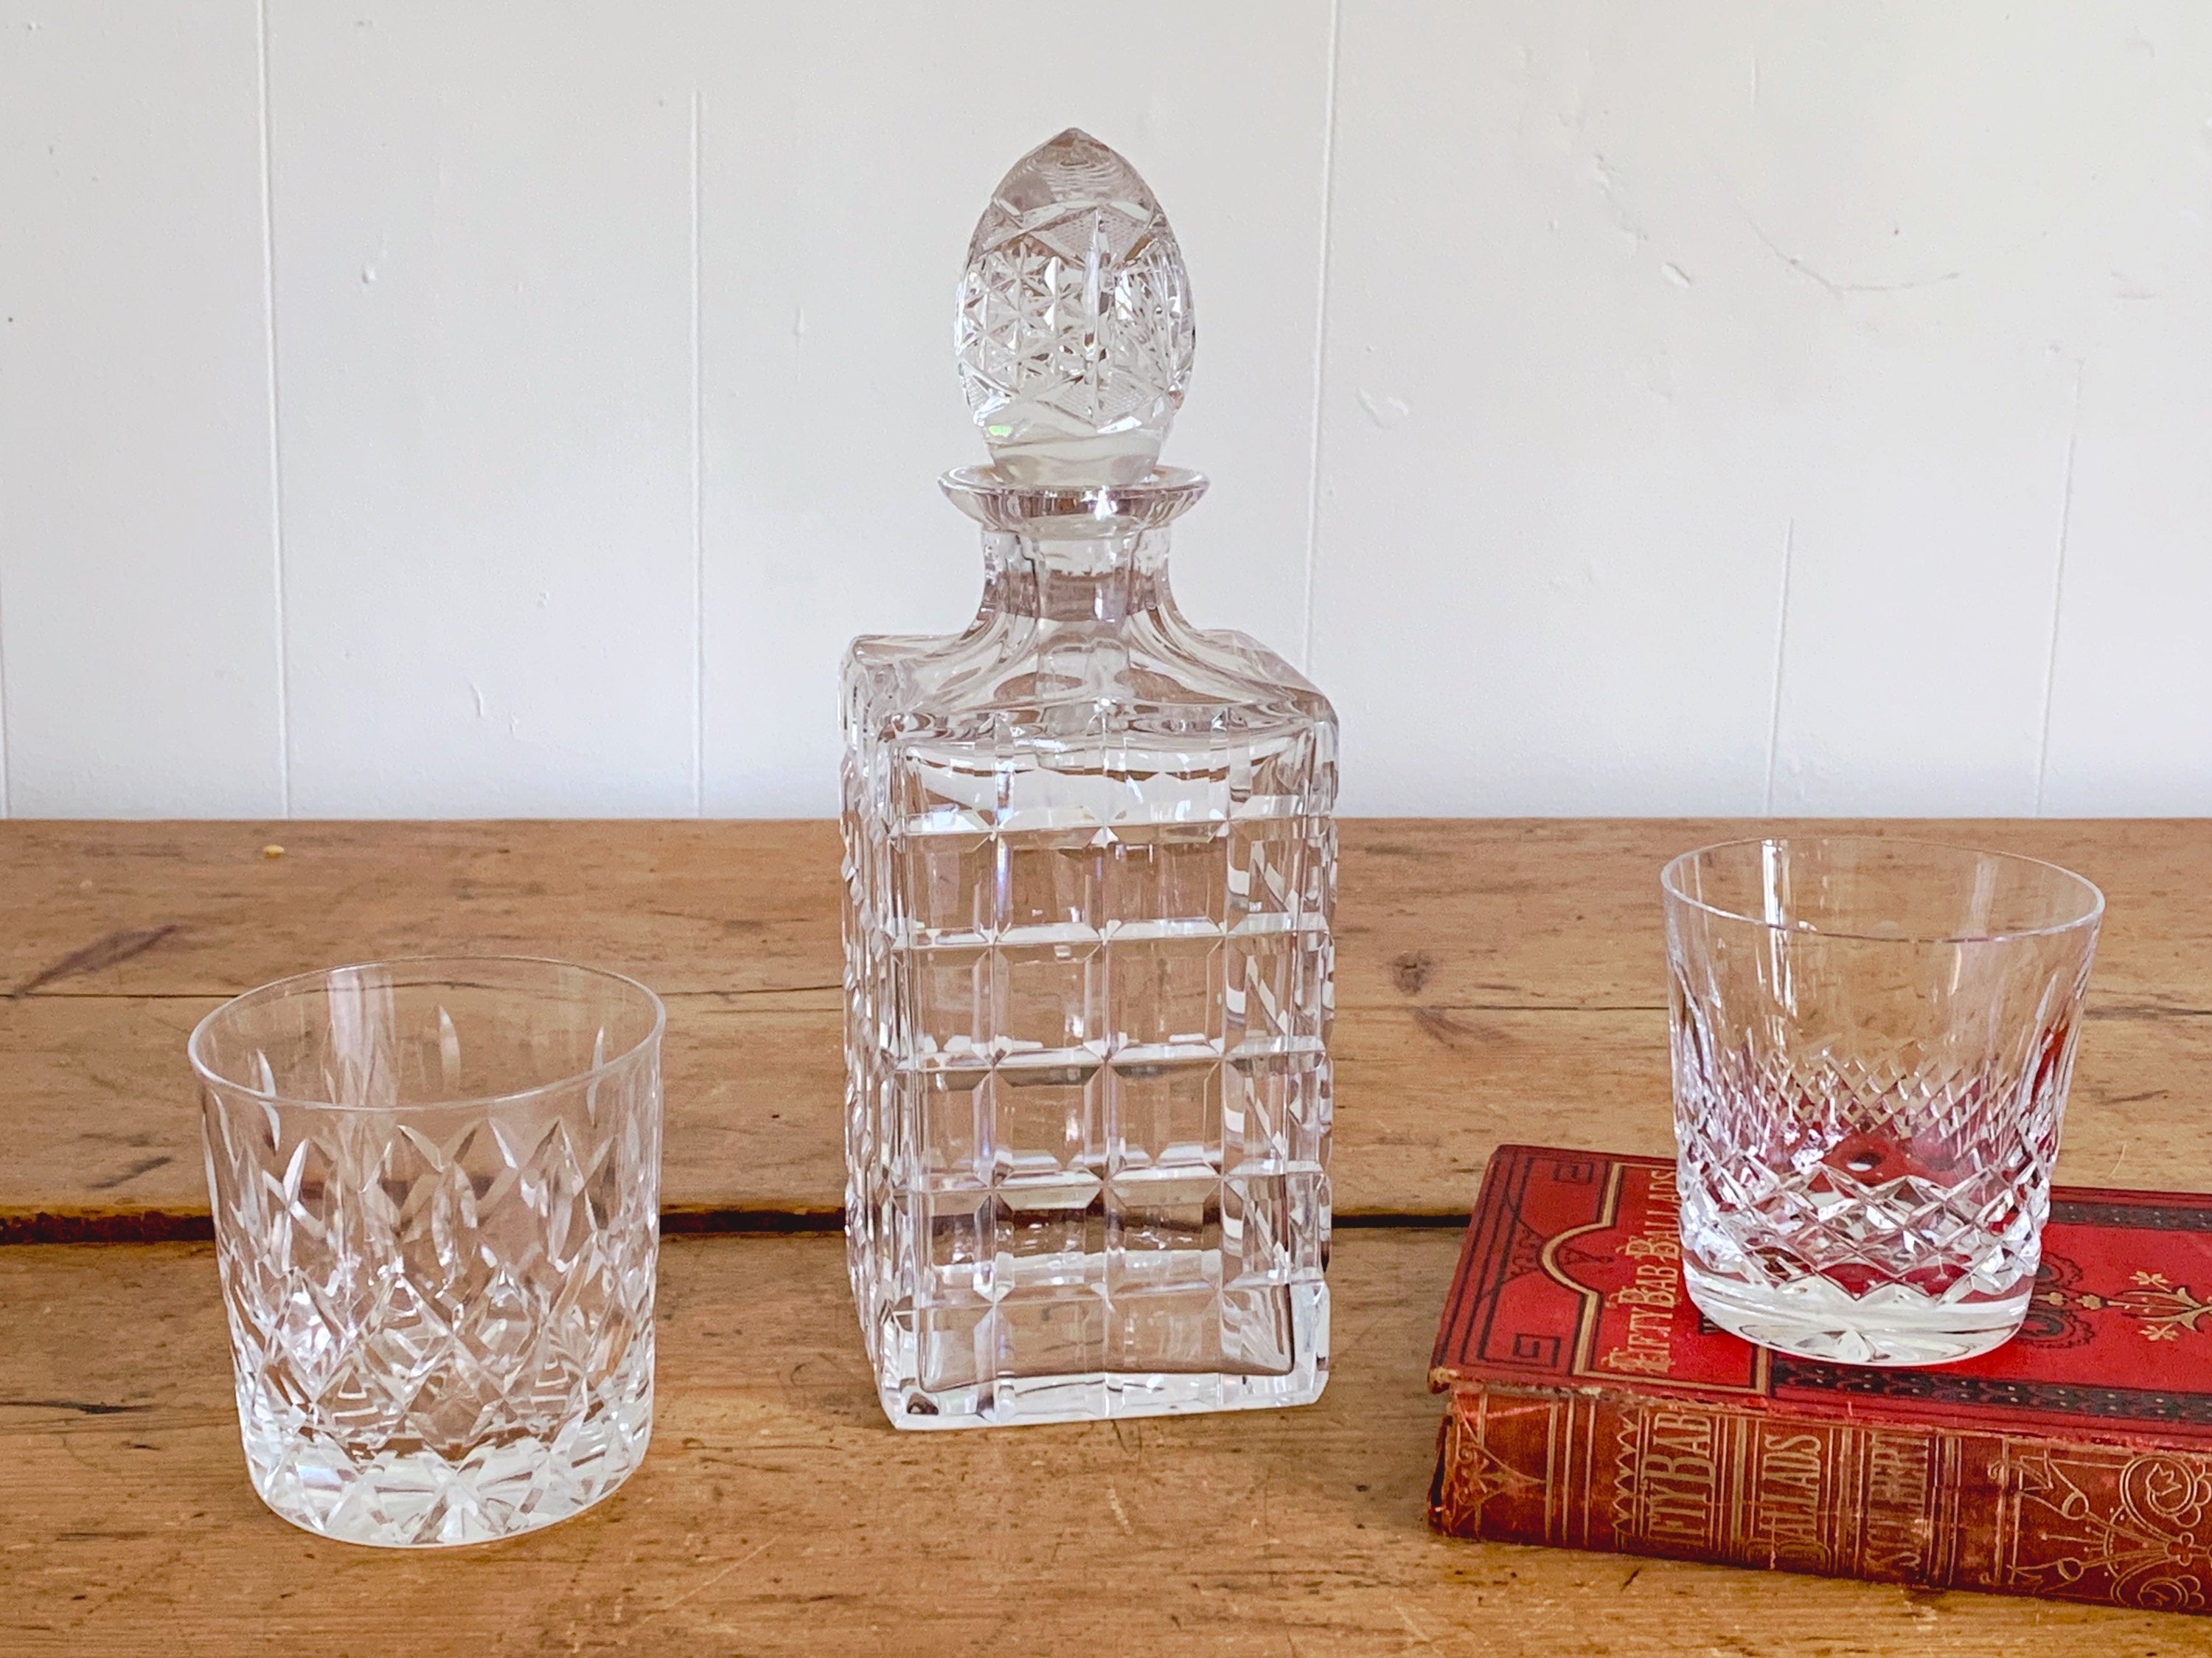 Vintage Square Cut Crystal Glass Decanter with Solid Crystal Stopper | Whiskey Decanter Barware | Gift for Him Father's Day Gift